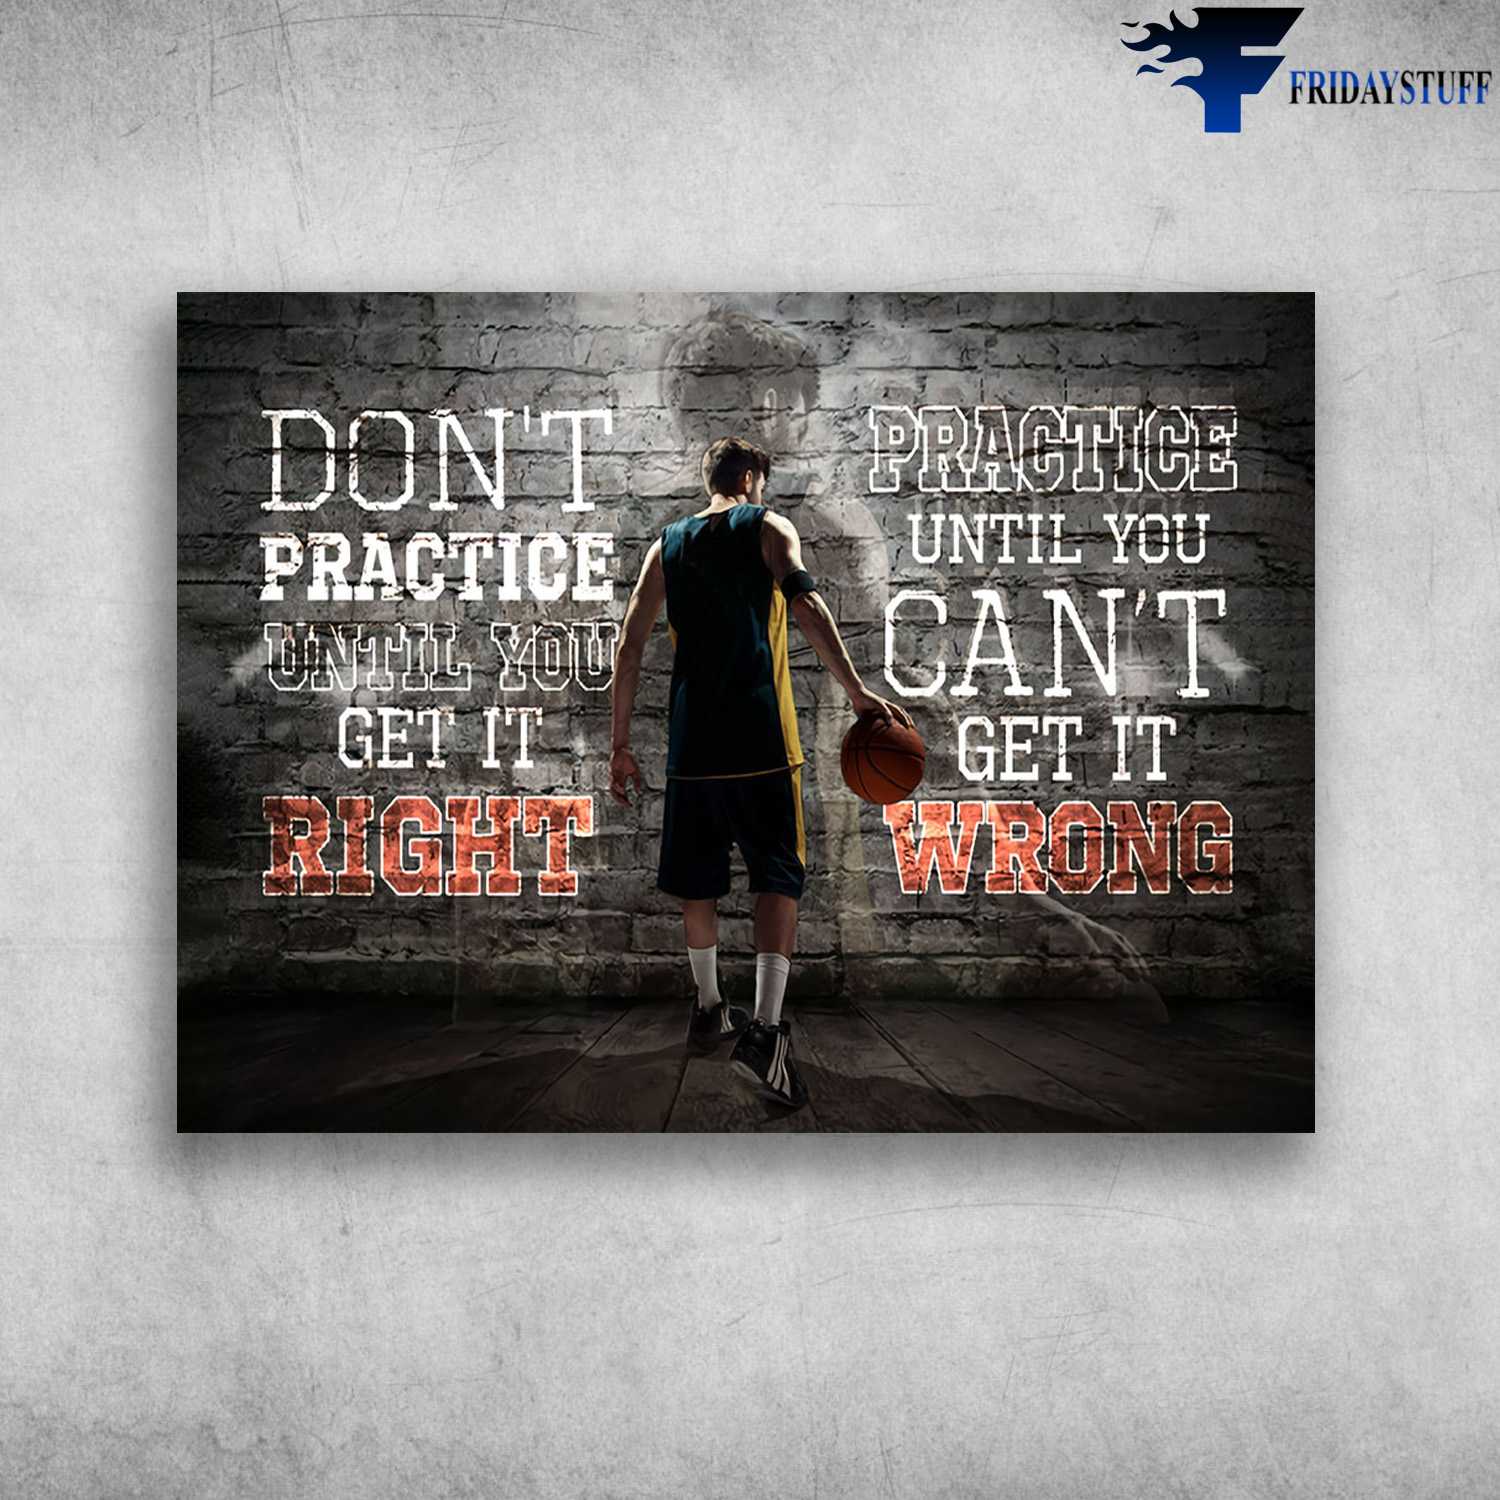 Basketball Player - Don't Practicce Until You Get In Right, Practice Until You Can't Get In Wrong